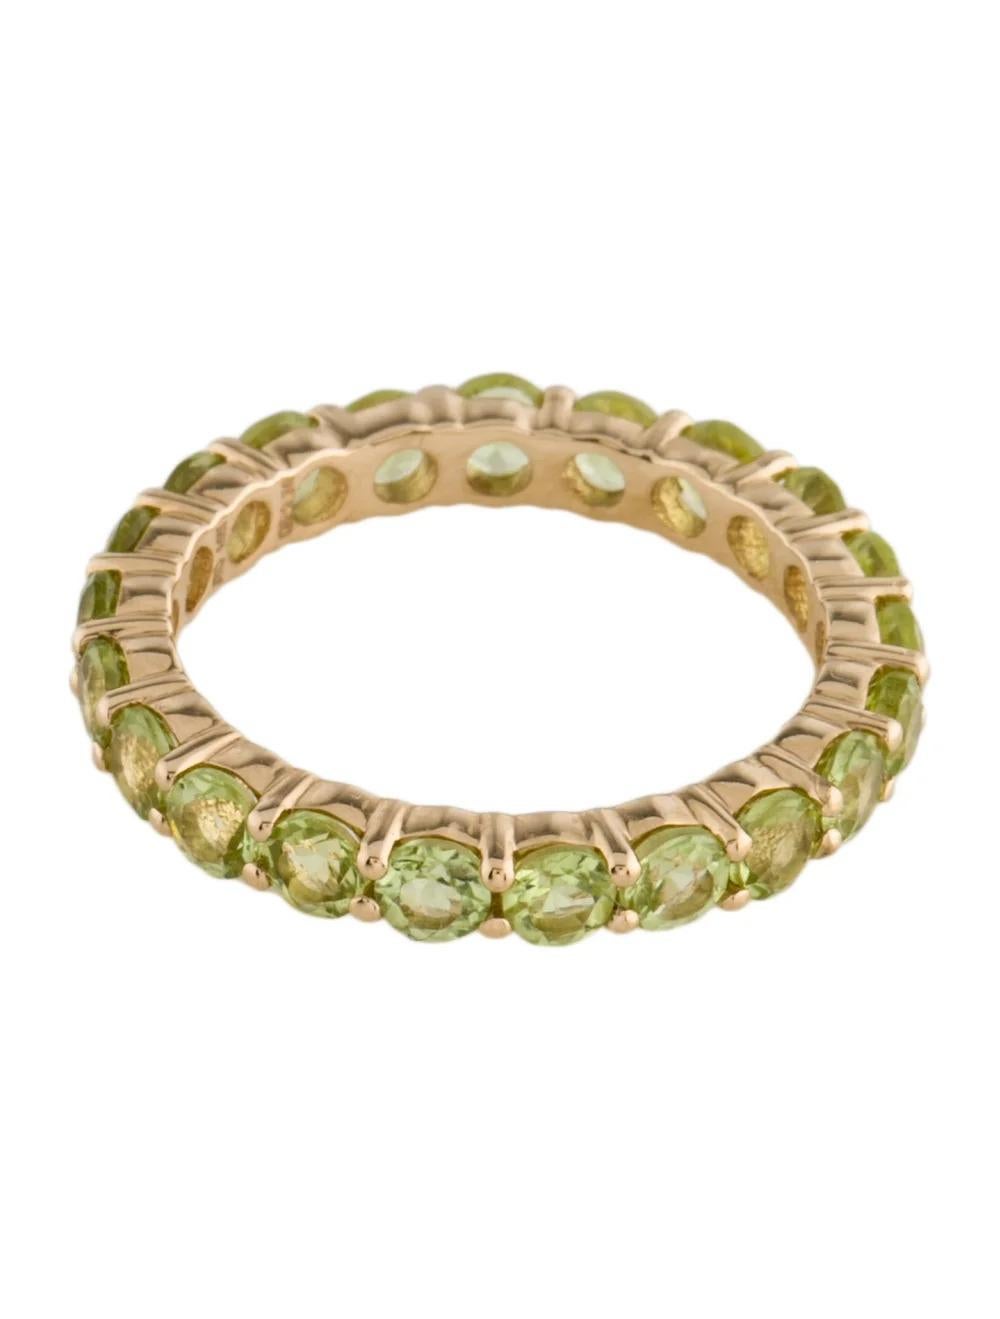 14K Peridot Eternity Band Ring Size 7 - Green Gemstone Fine Jewelry, Luxury In New Condition For Sale In Holtsville, NY